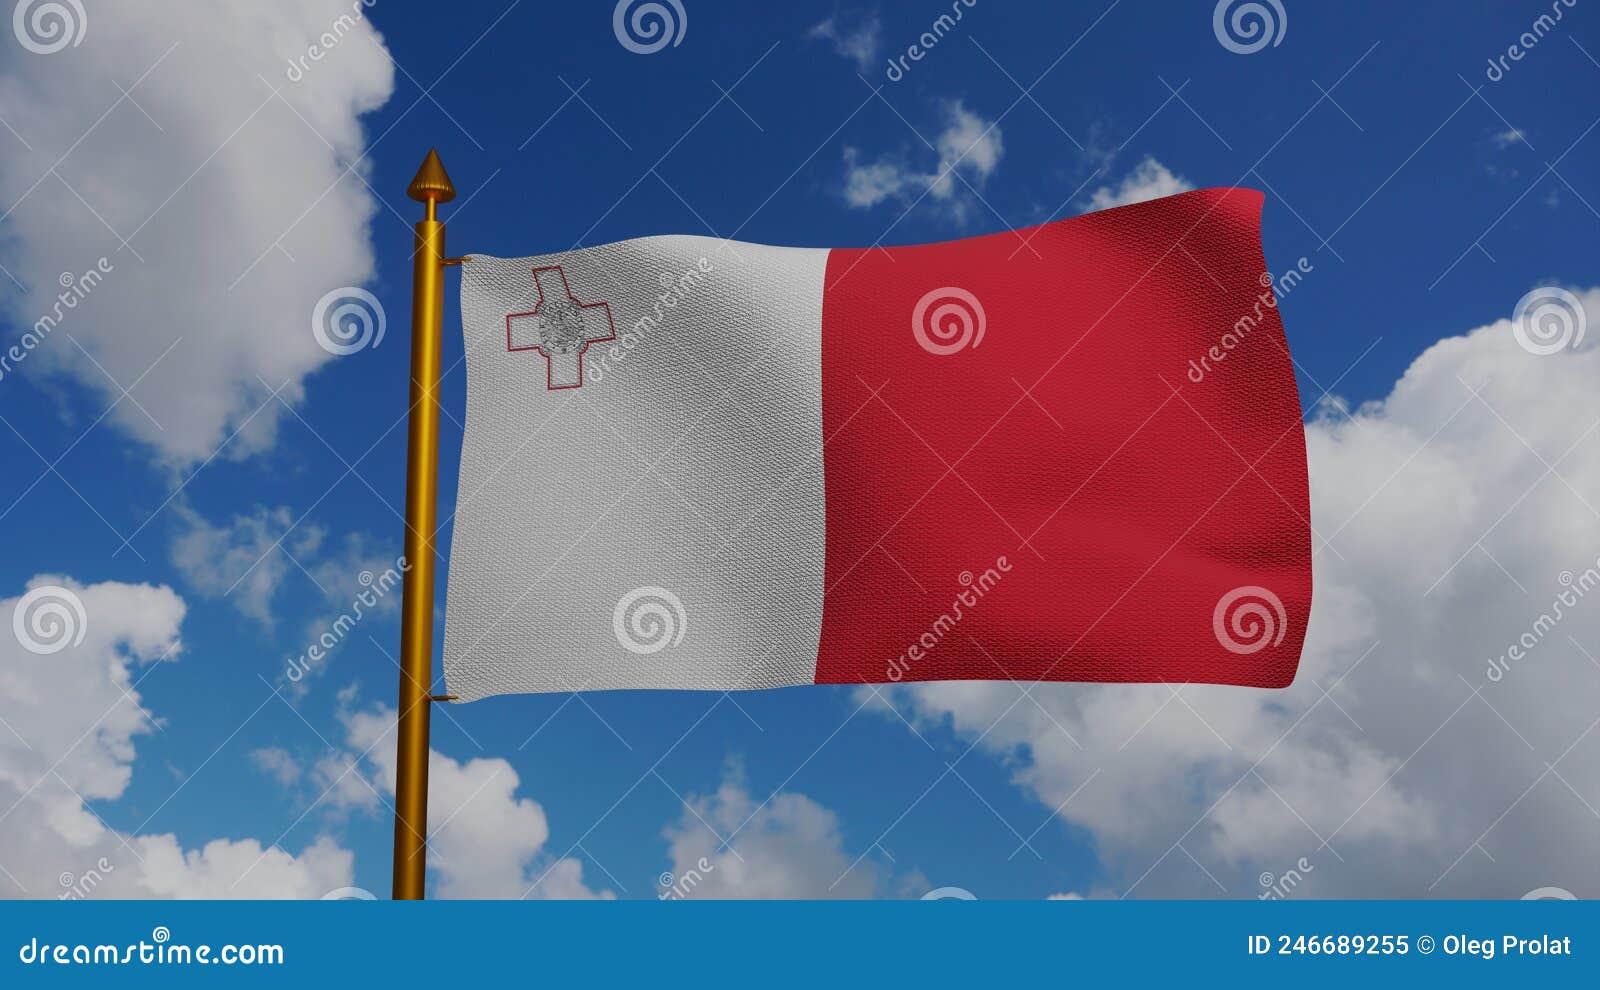 national flag of malta waving 3d render with flagpole and blue sky, republic of malta flag textile or bandiera ta